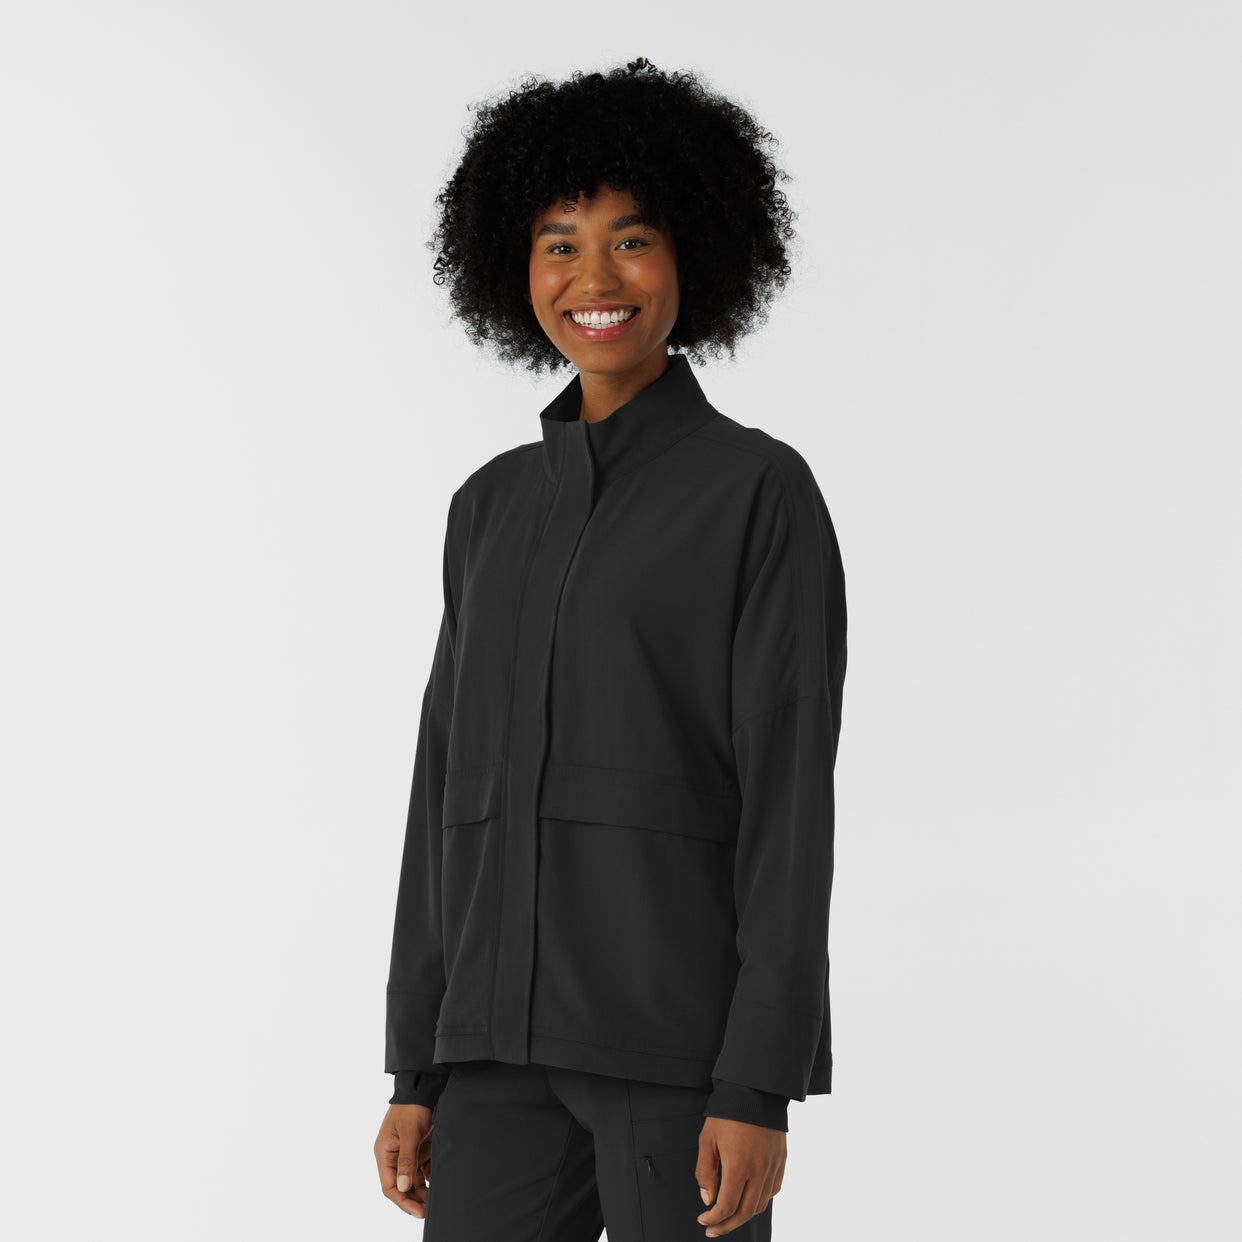 Knits and Layers Women's Germs Happen Packable Scrub Jacket Black side view